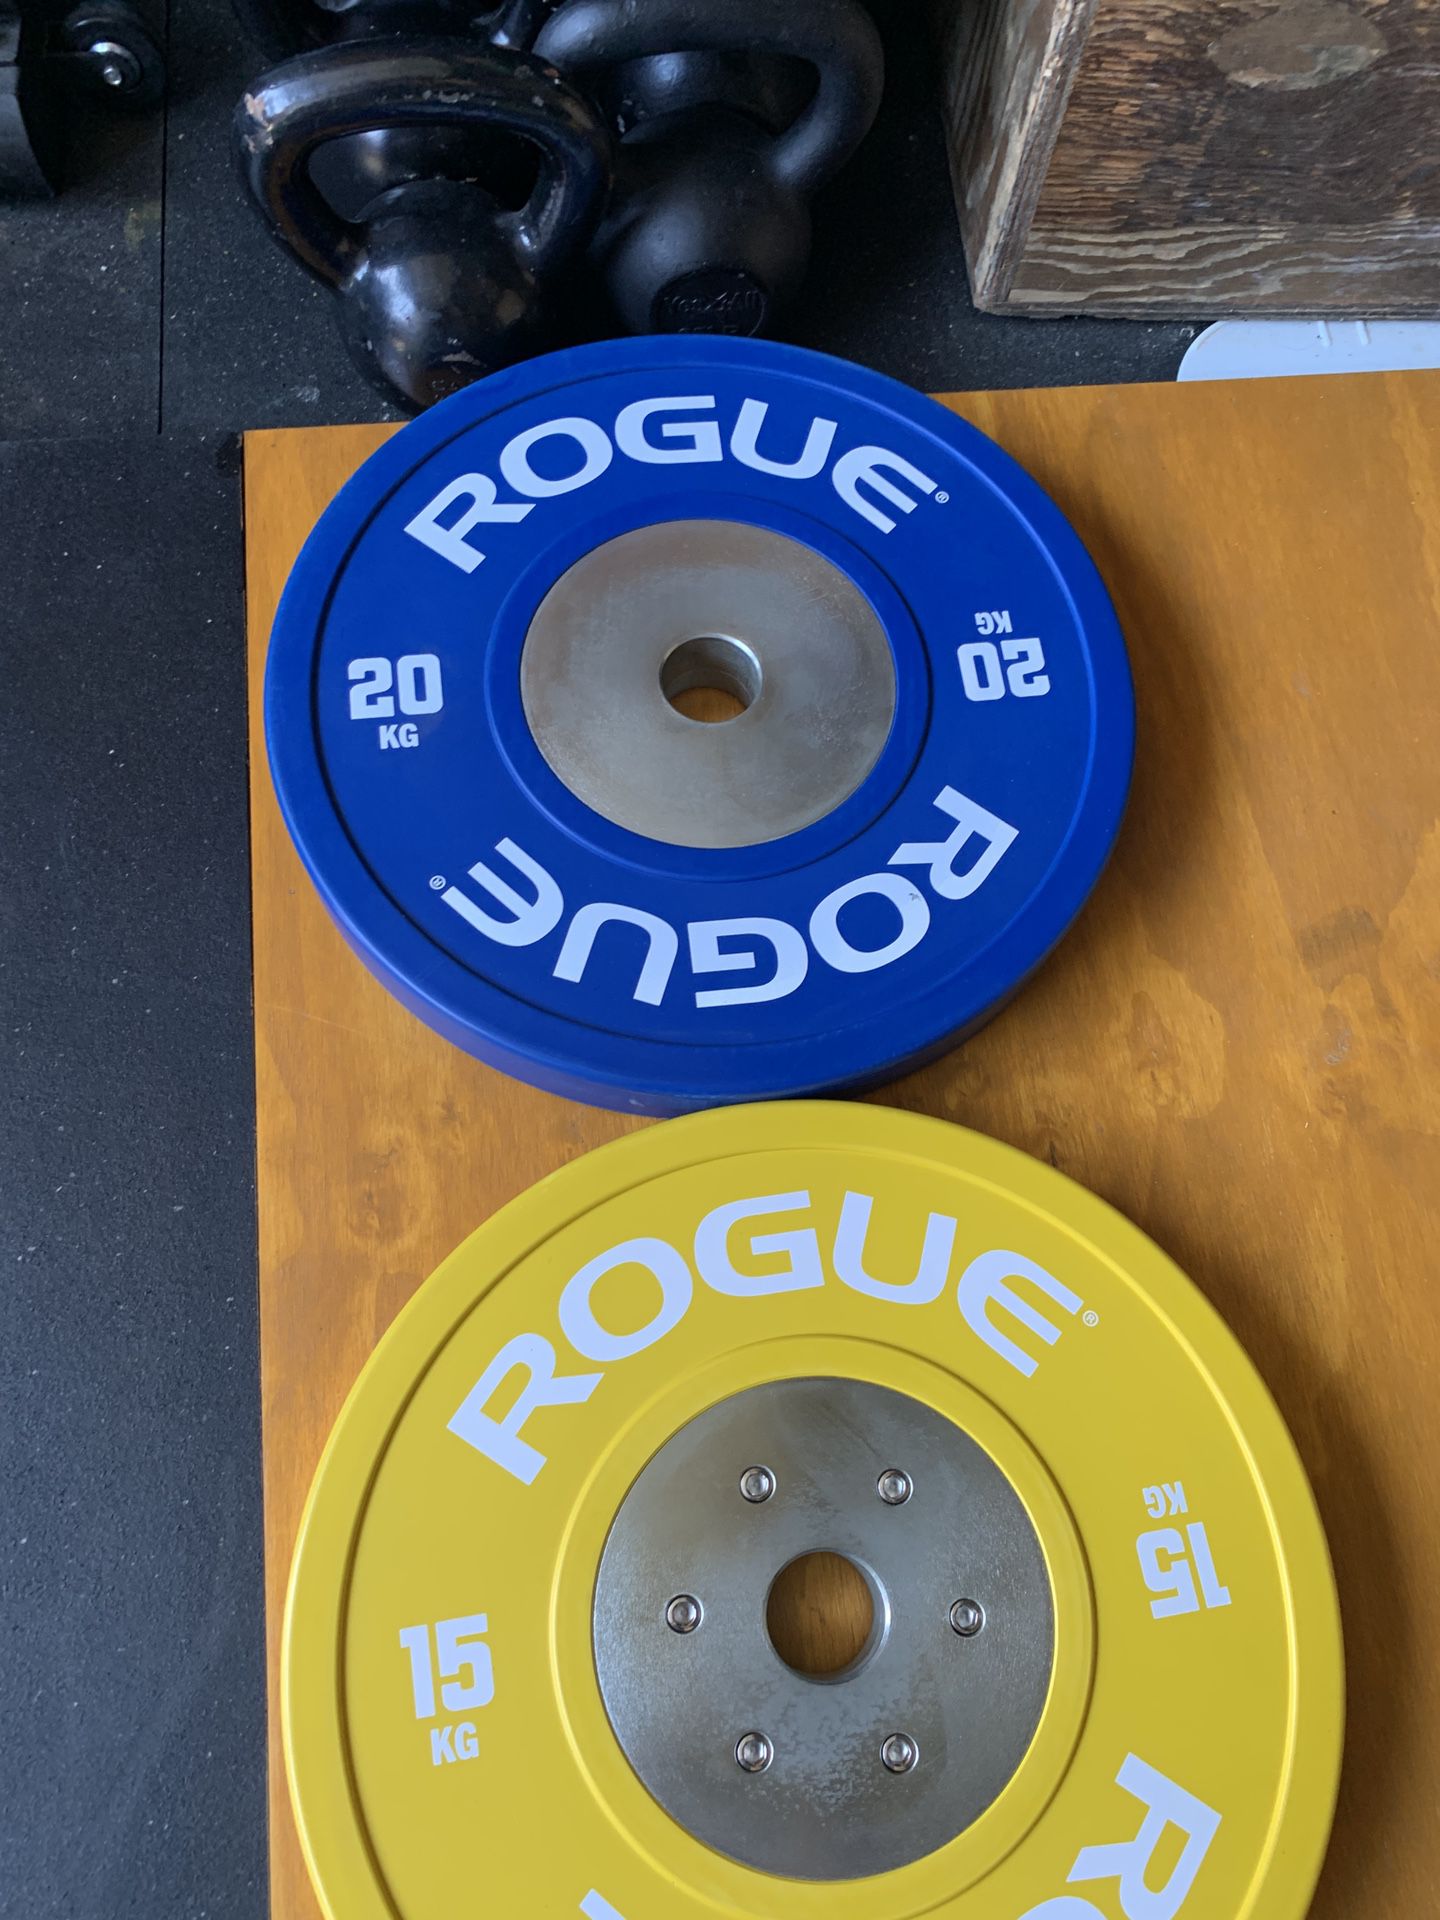 Rogue competition bumper plates $1195